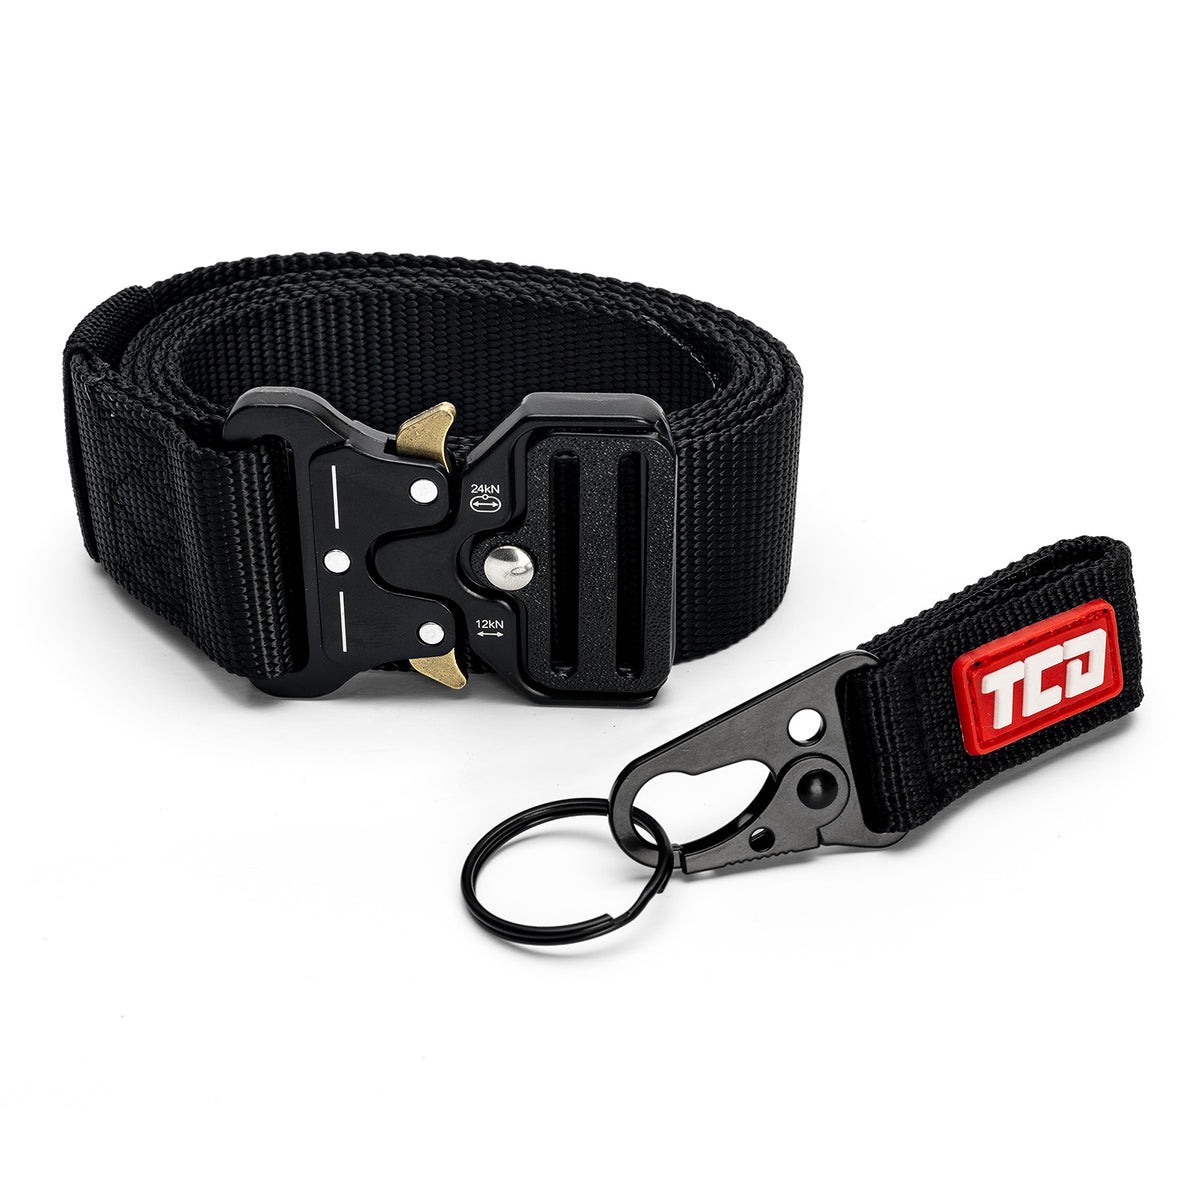 TCD - Heavy Duty Work and Tactical Belt with Quick Release Buckle